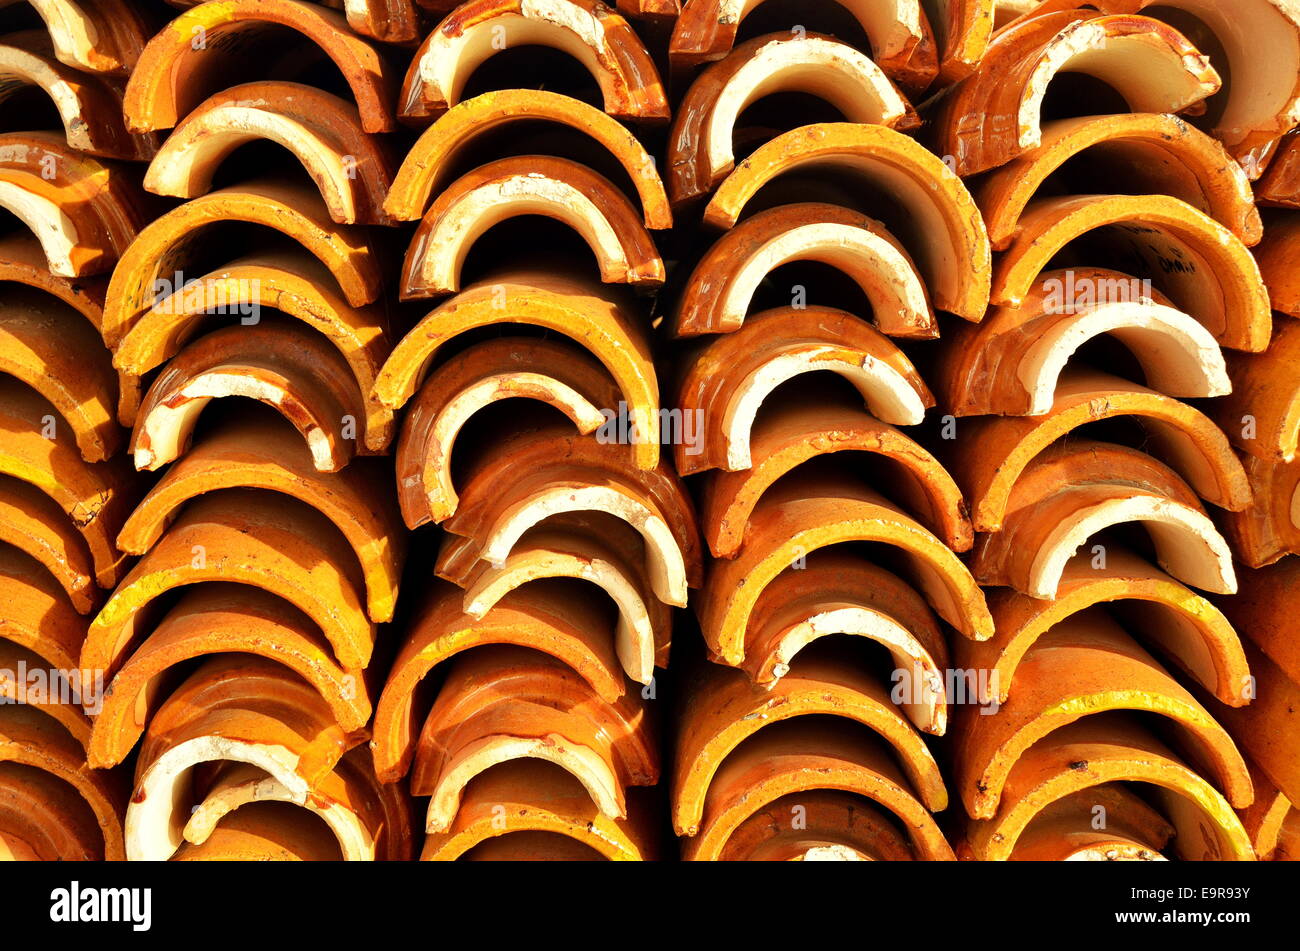 Orange Tile Roof of Temple on pile up Stock Photo